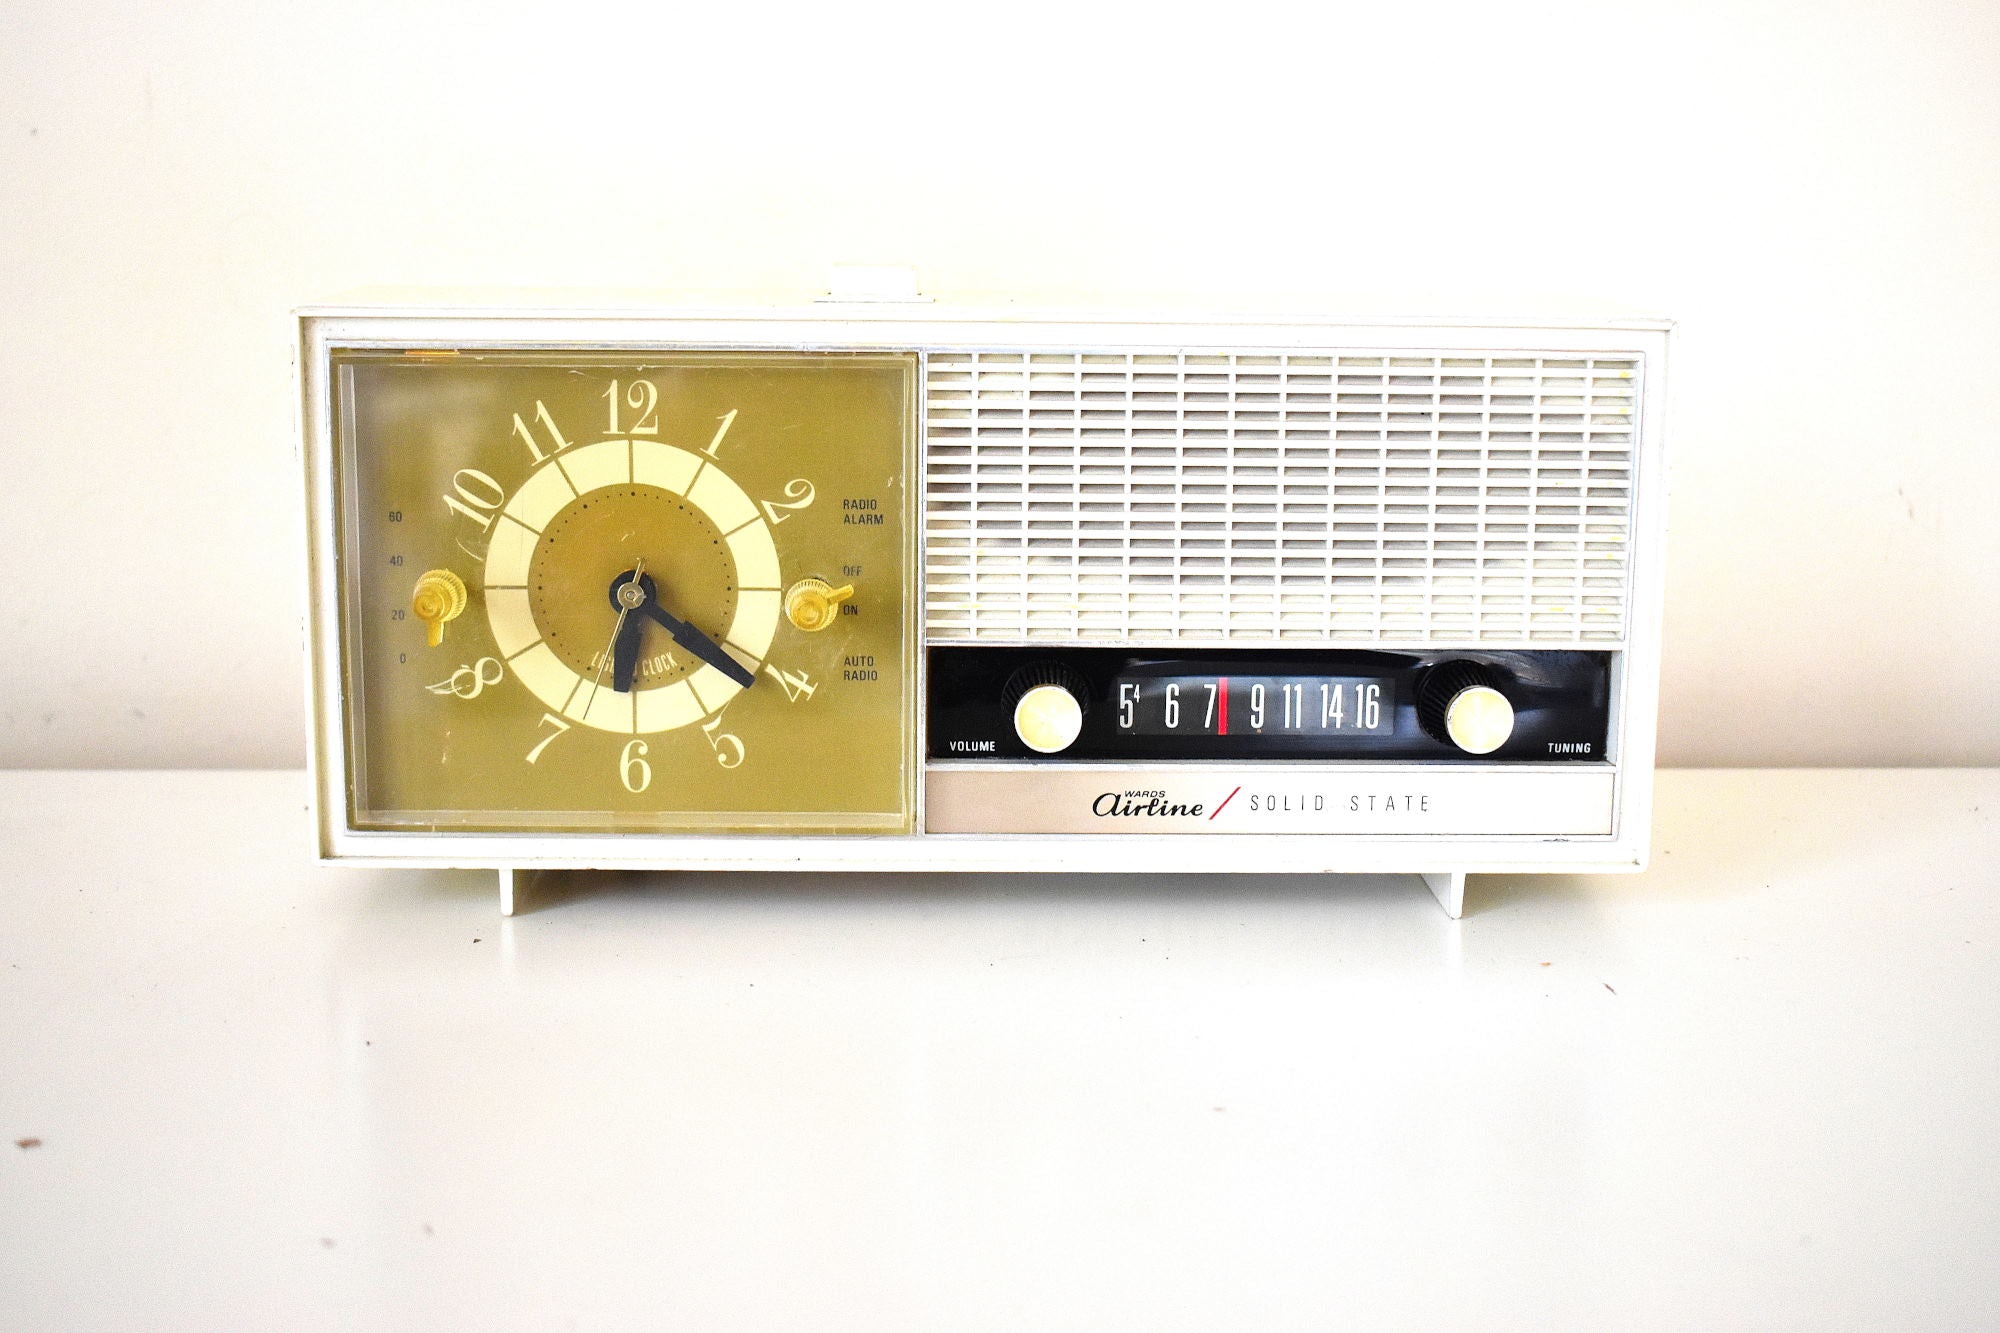 Bluetooth Ready To Go - White 1964 Airline Model 1840A Solid Stat – Retro Radio